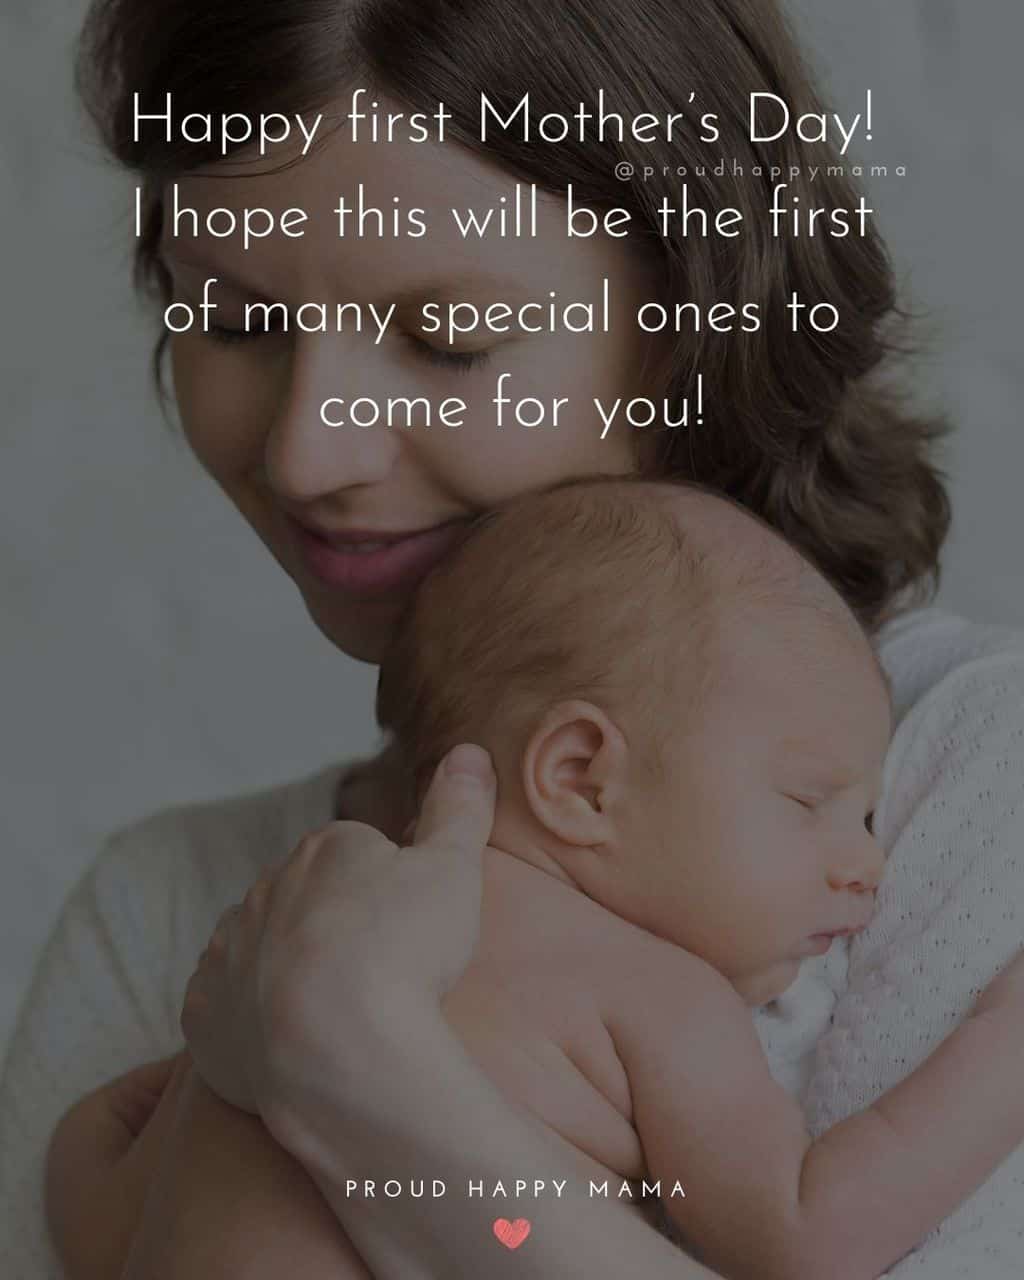 First Mothers Day Quotes - Happy first Mother’s Day! I hope this will be the first of many special ones to come for you!’